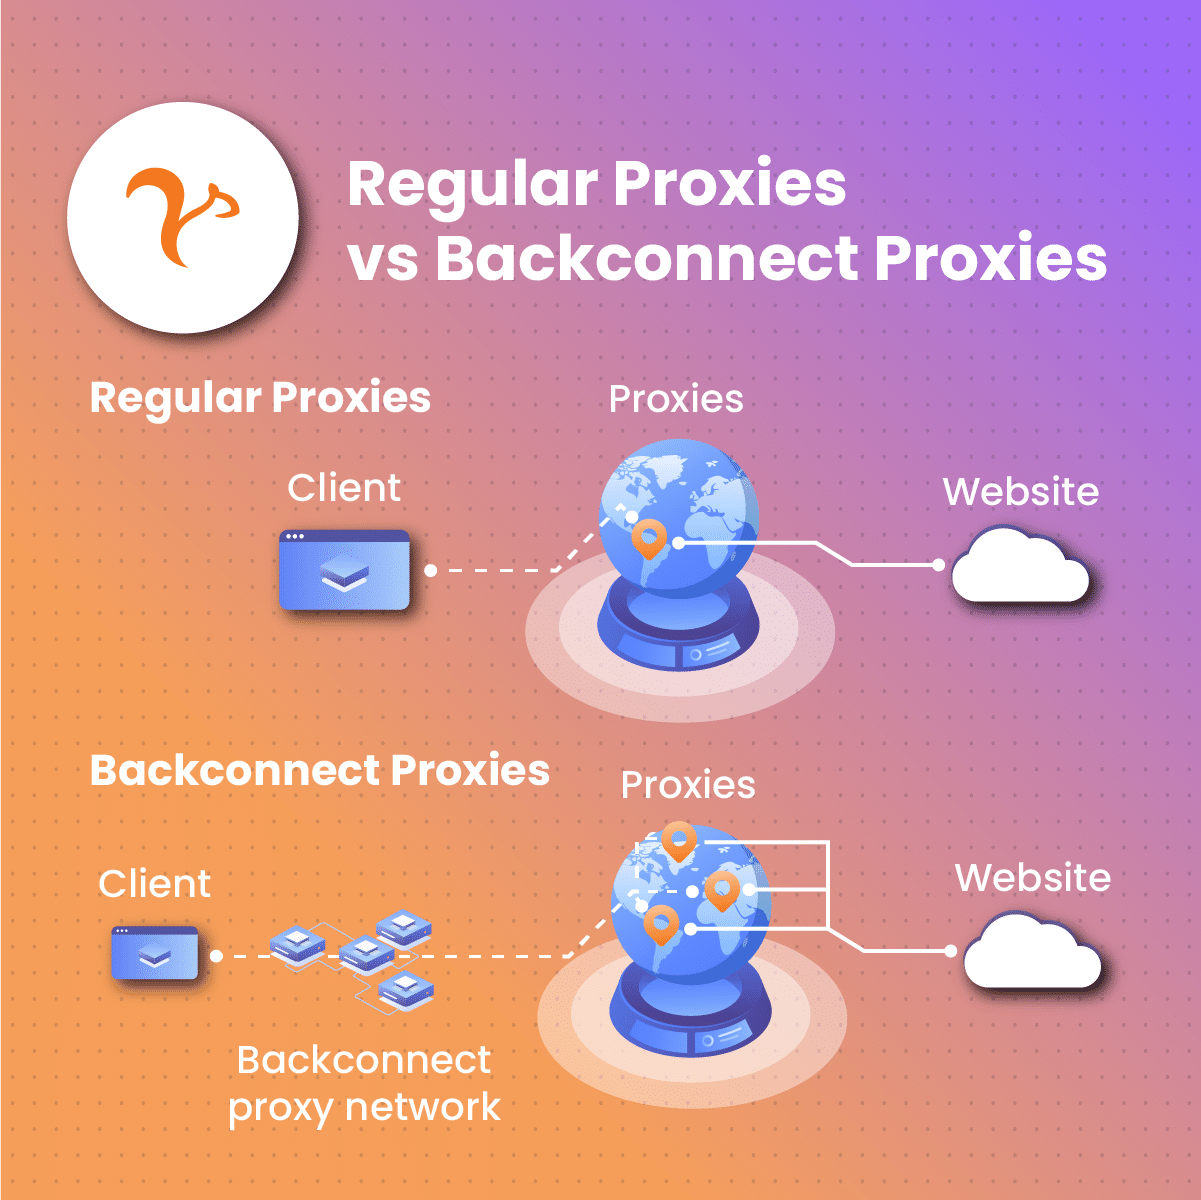 Differentiating Regular Proxies from Backconnect Proxies